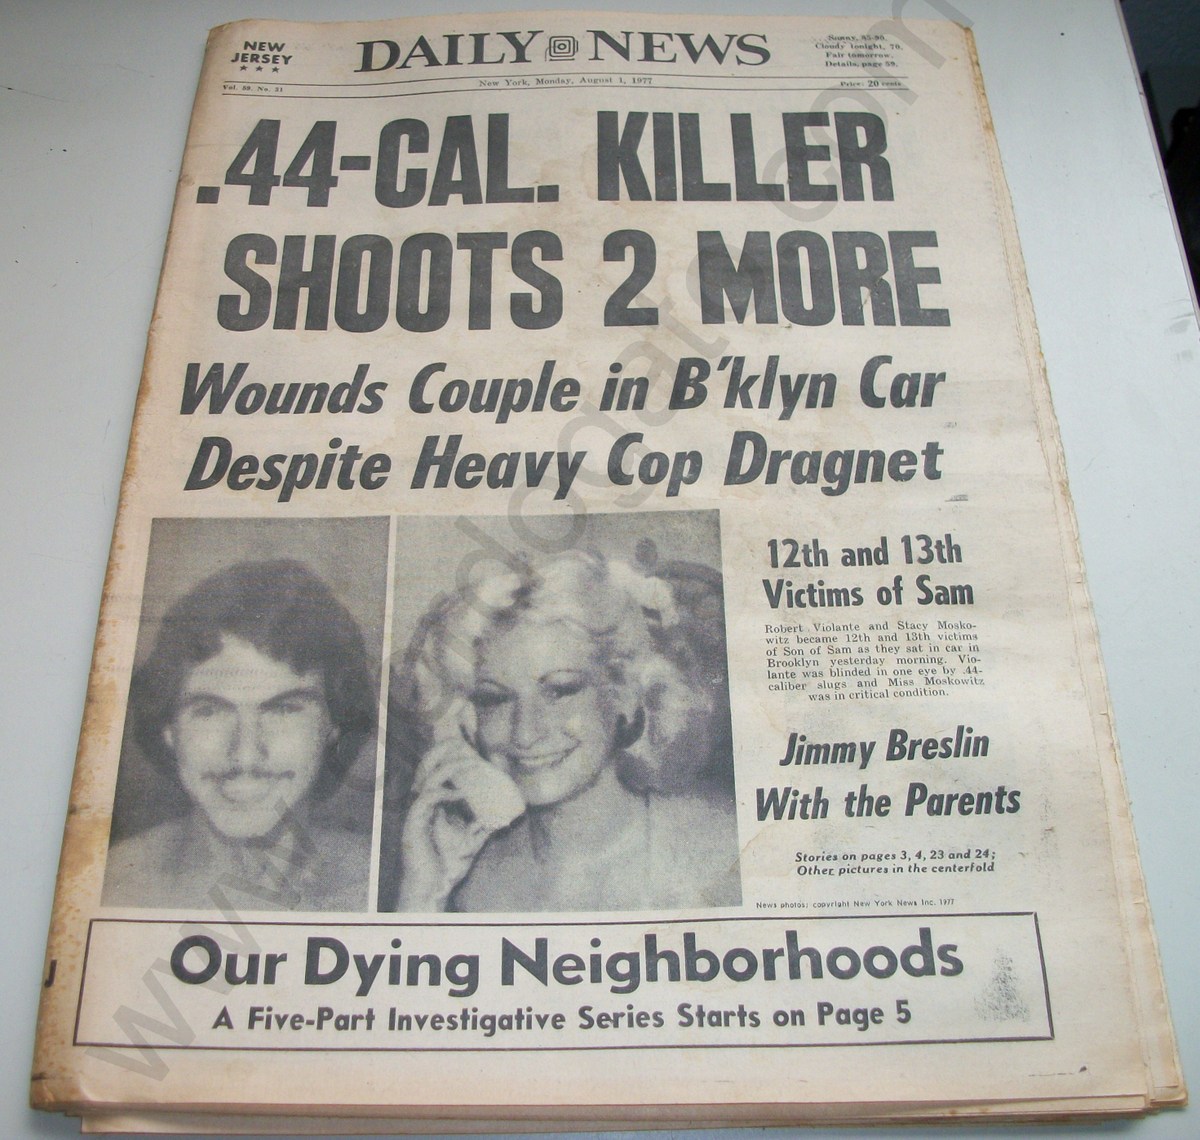 Daily News - Monday, August 1, 1977 - Son of Sam Serial Killer